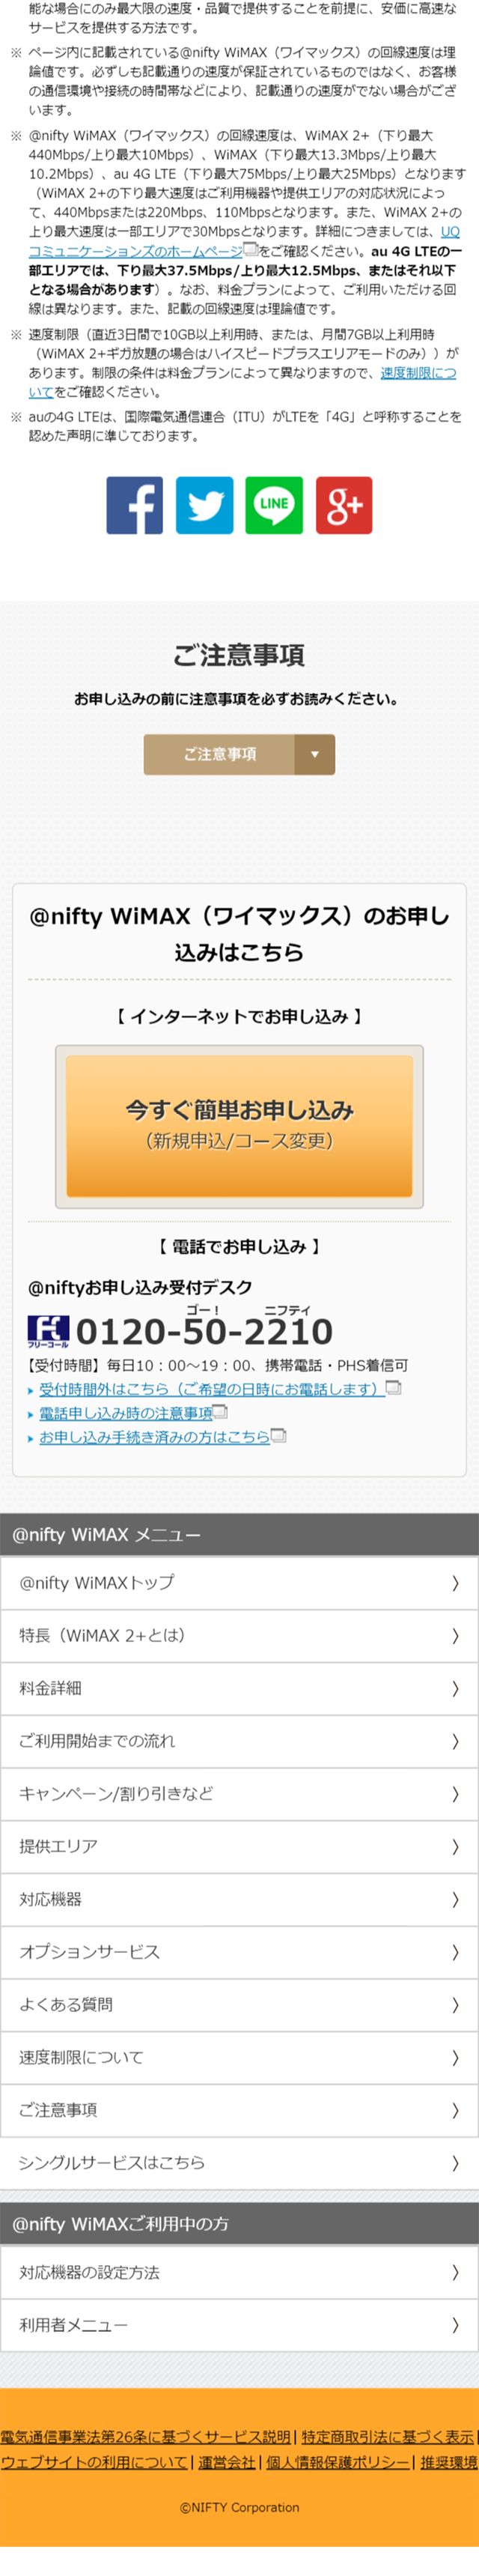 @nifty WiMAX_sp_2